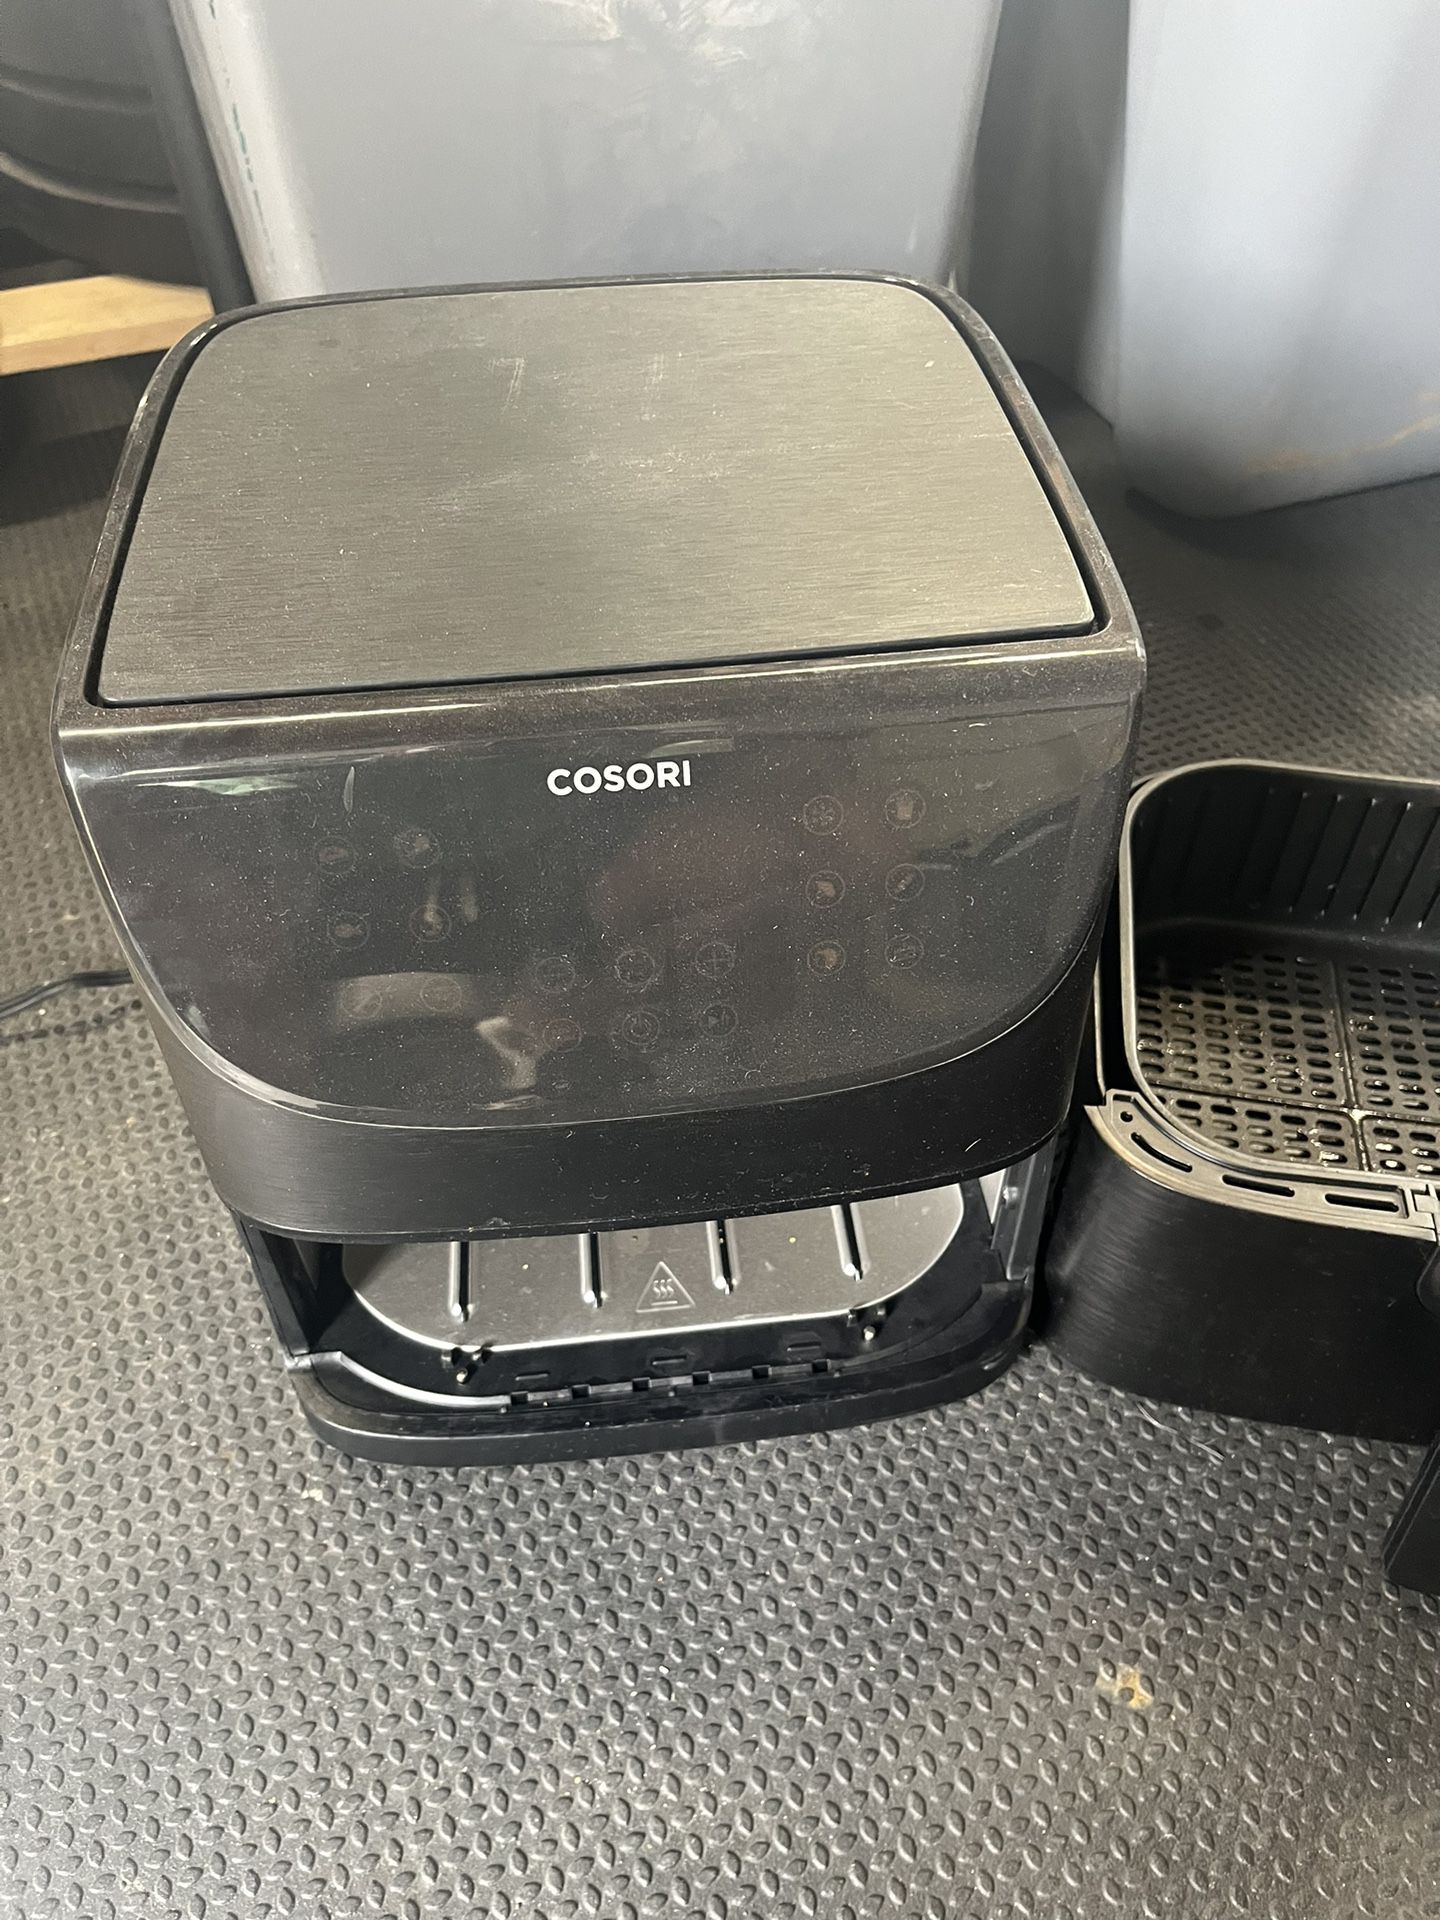 Crux 2.2 Pound Touchscreen Air Convection Fryer for Sale in Desert Hot  Springs, CA - OfferUp